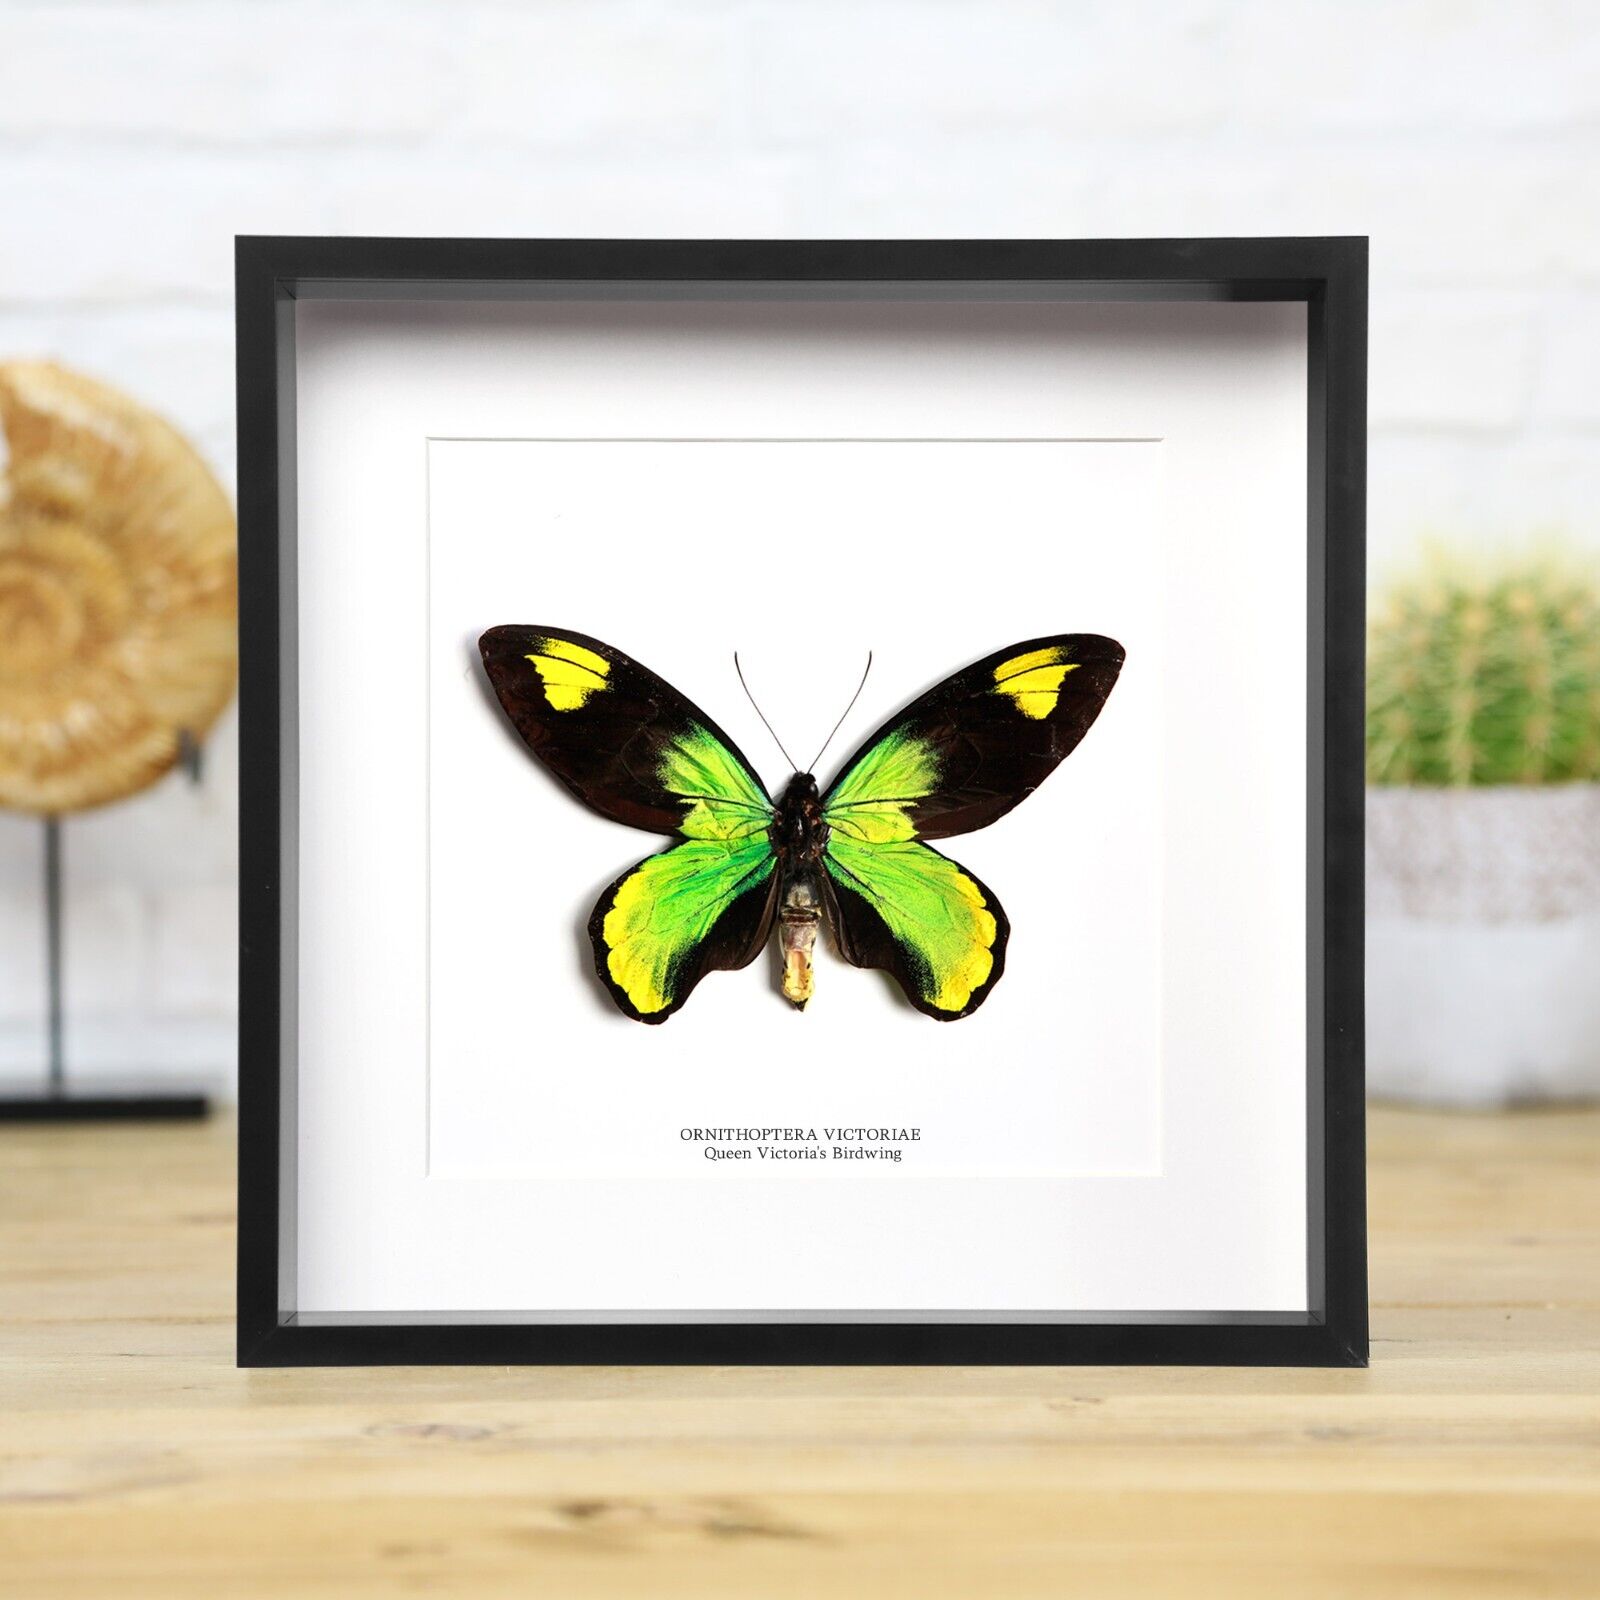 Queen Victoria's Birdwing Male Handcrafted Entomology Taxidermy Butterfly Frame